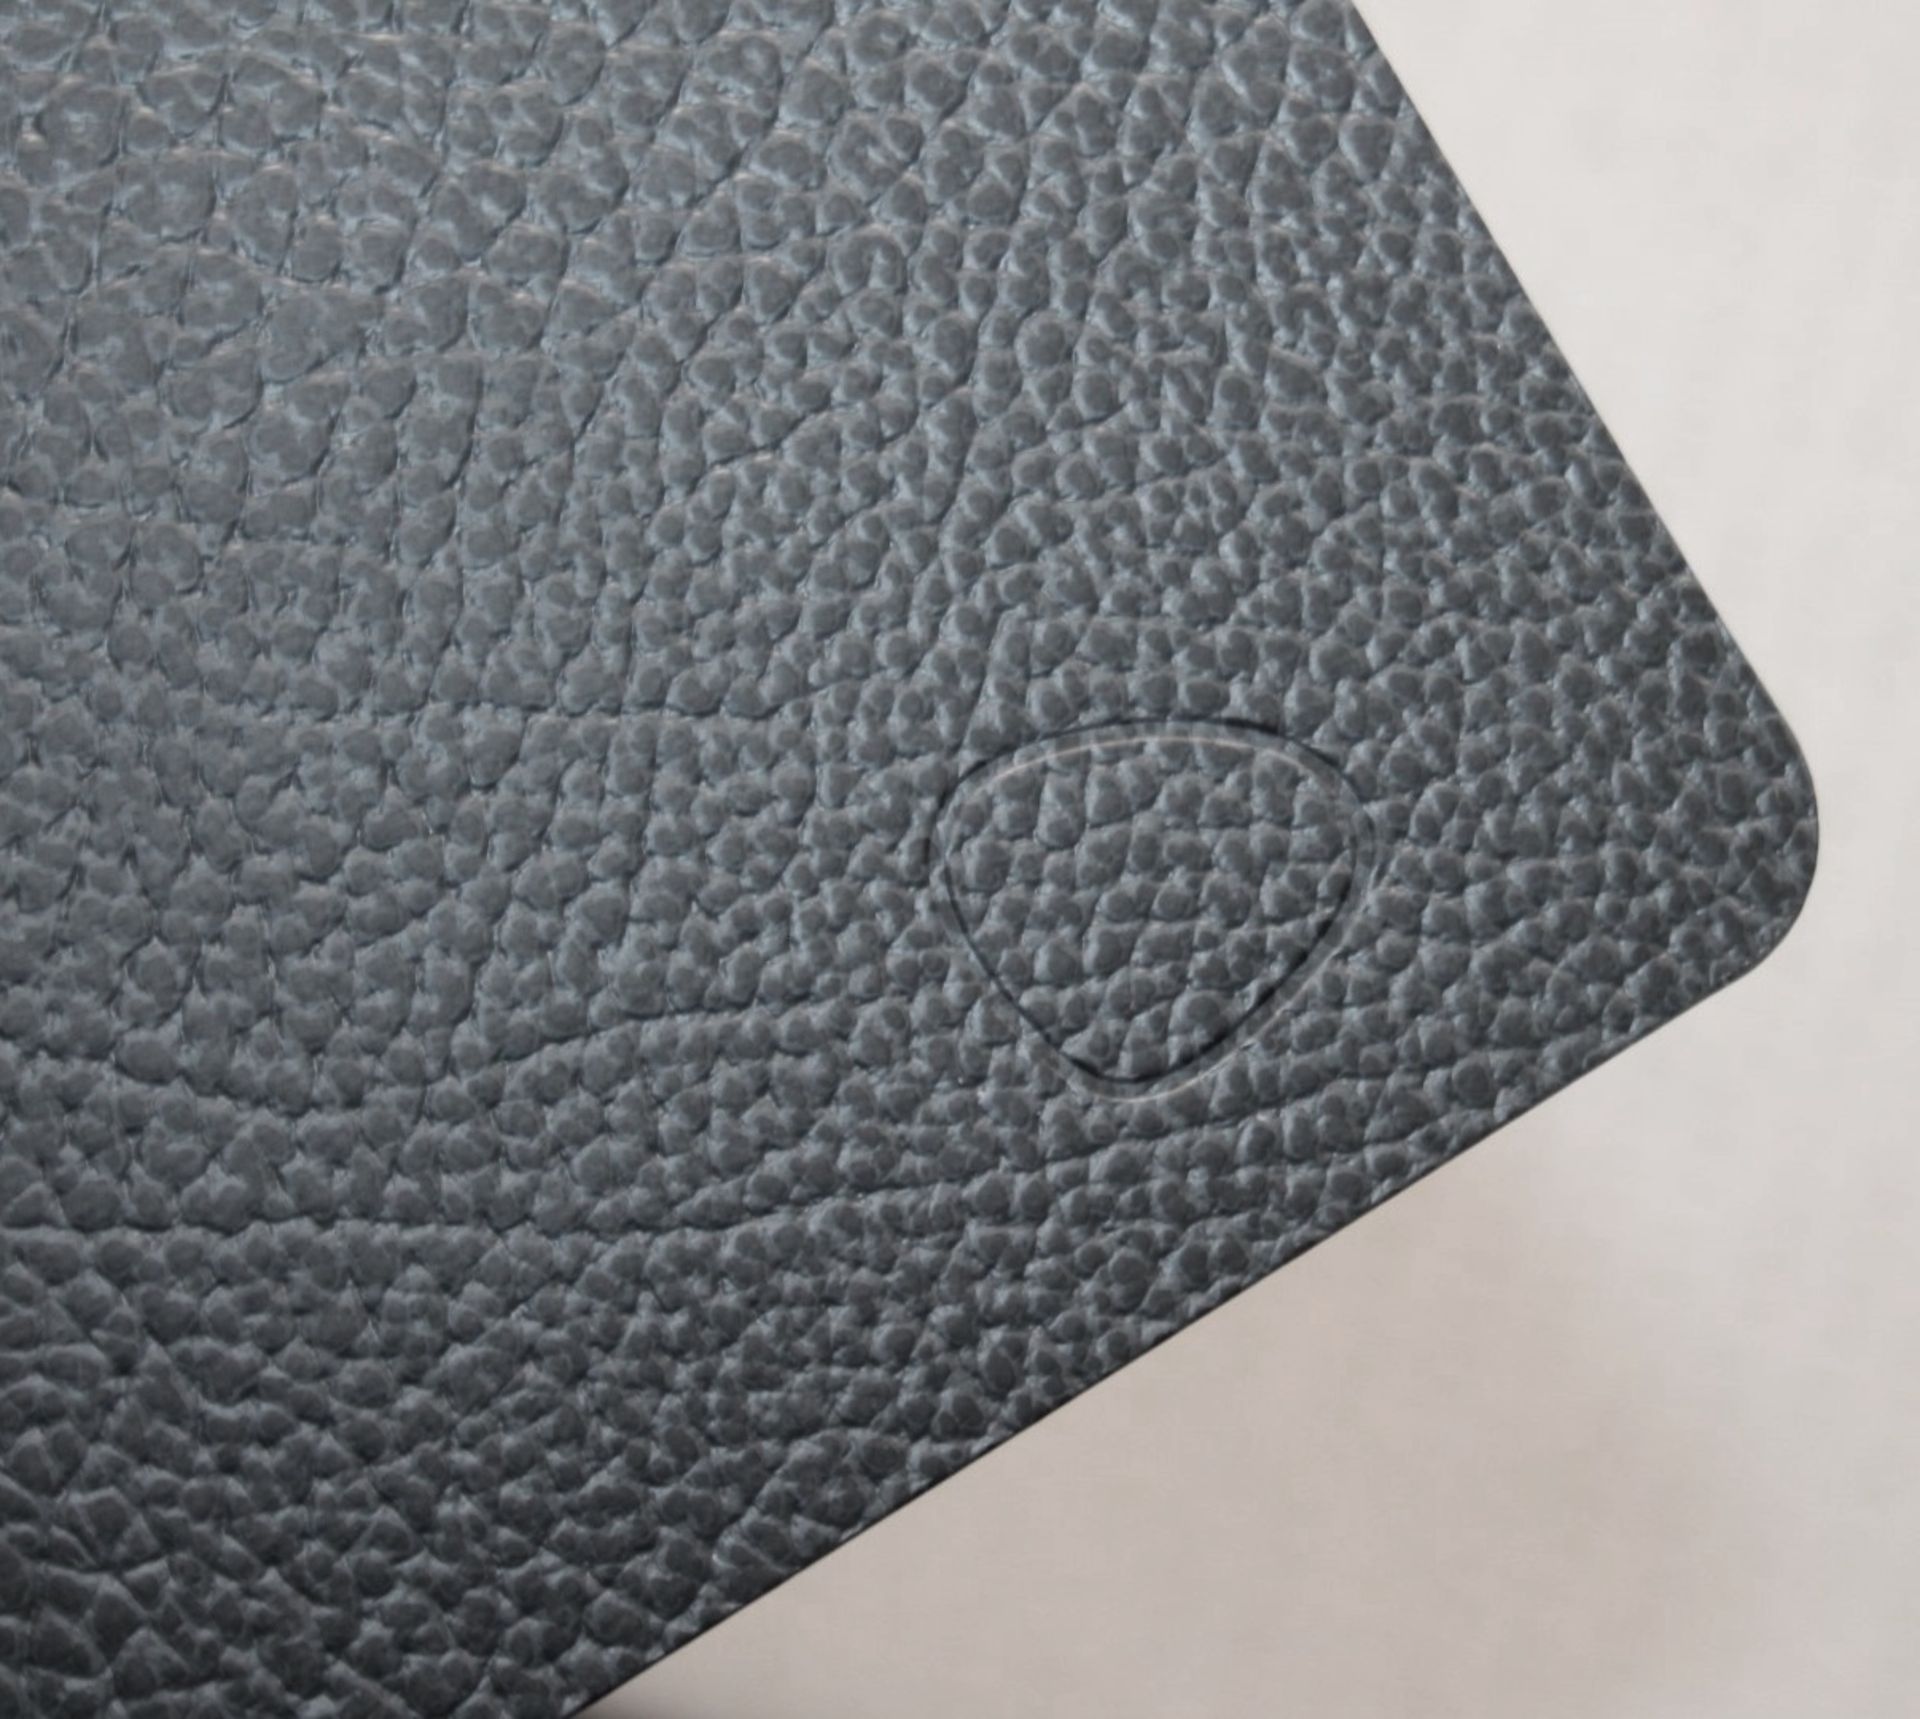 Set of 4 x LIND DNA 'Hippo' Leather Square Placemats Table Mats, In Black - Original Price £72.95 - Image 8 of 9